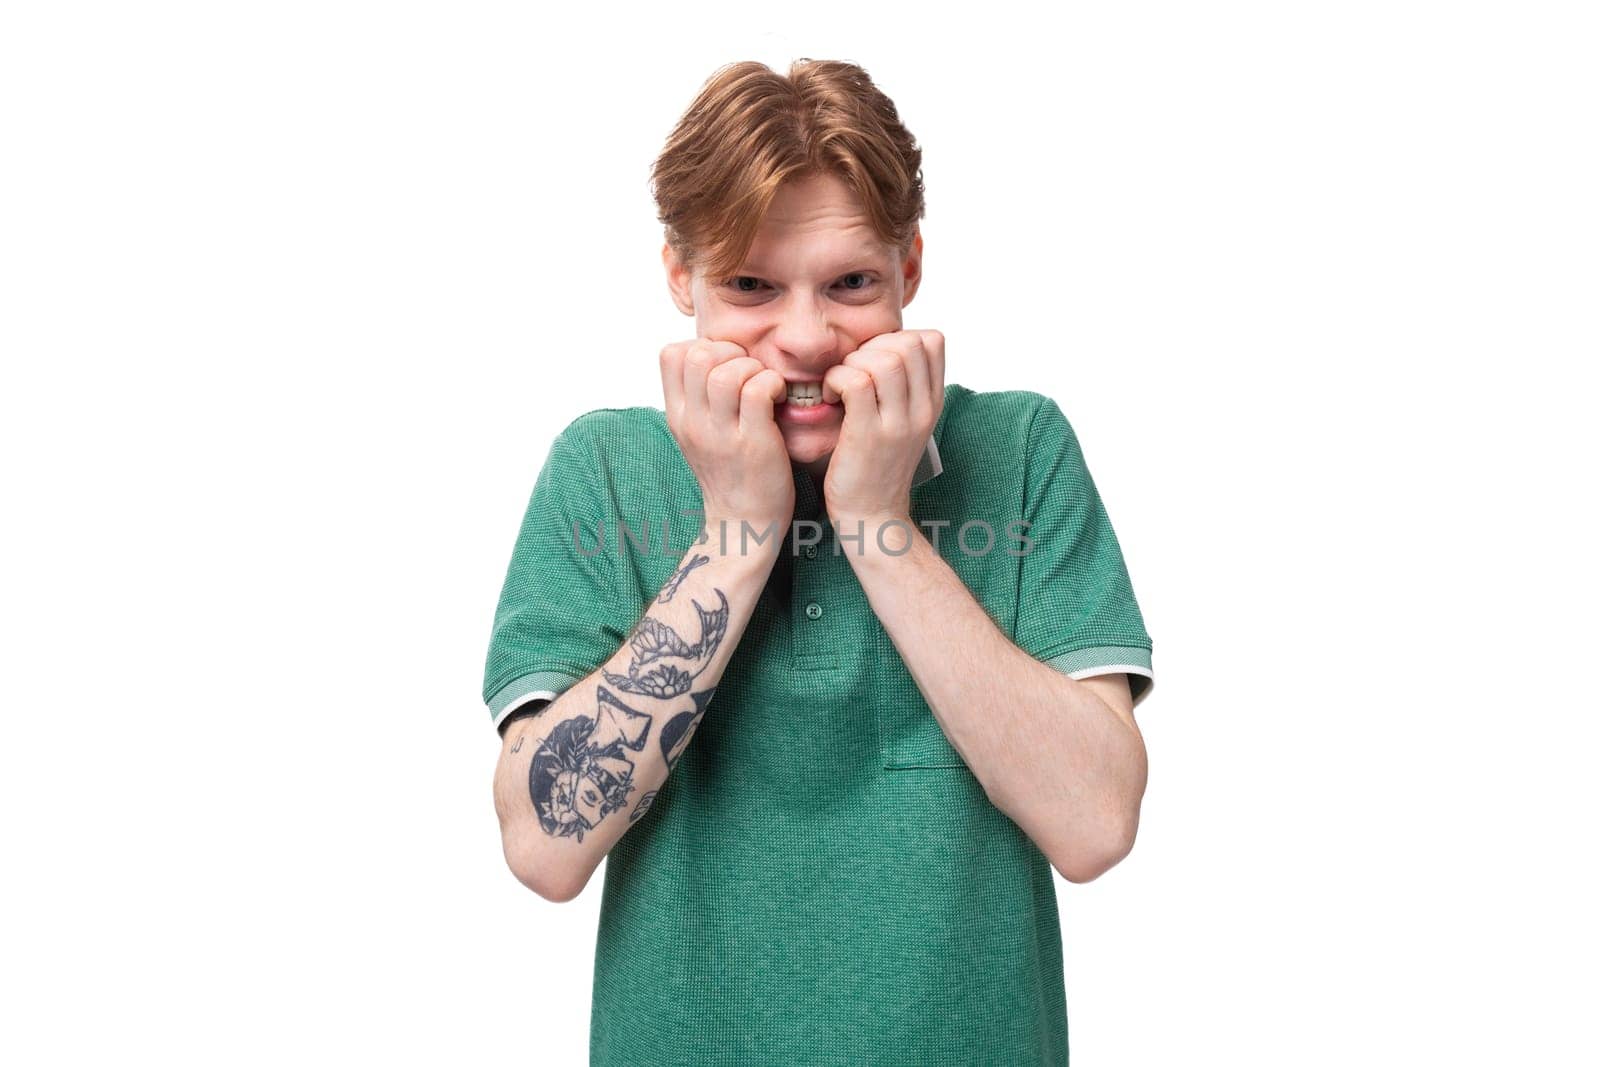 young stylish european guy with red hair with a tattoo on his forearm wears a green t-shirt has doubts.